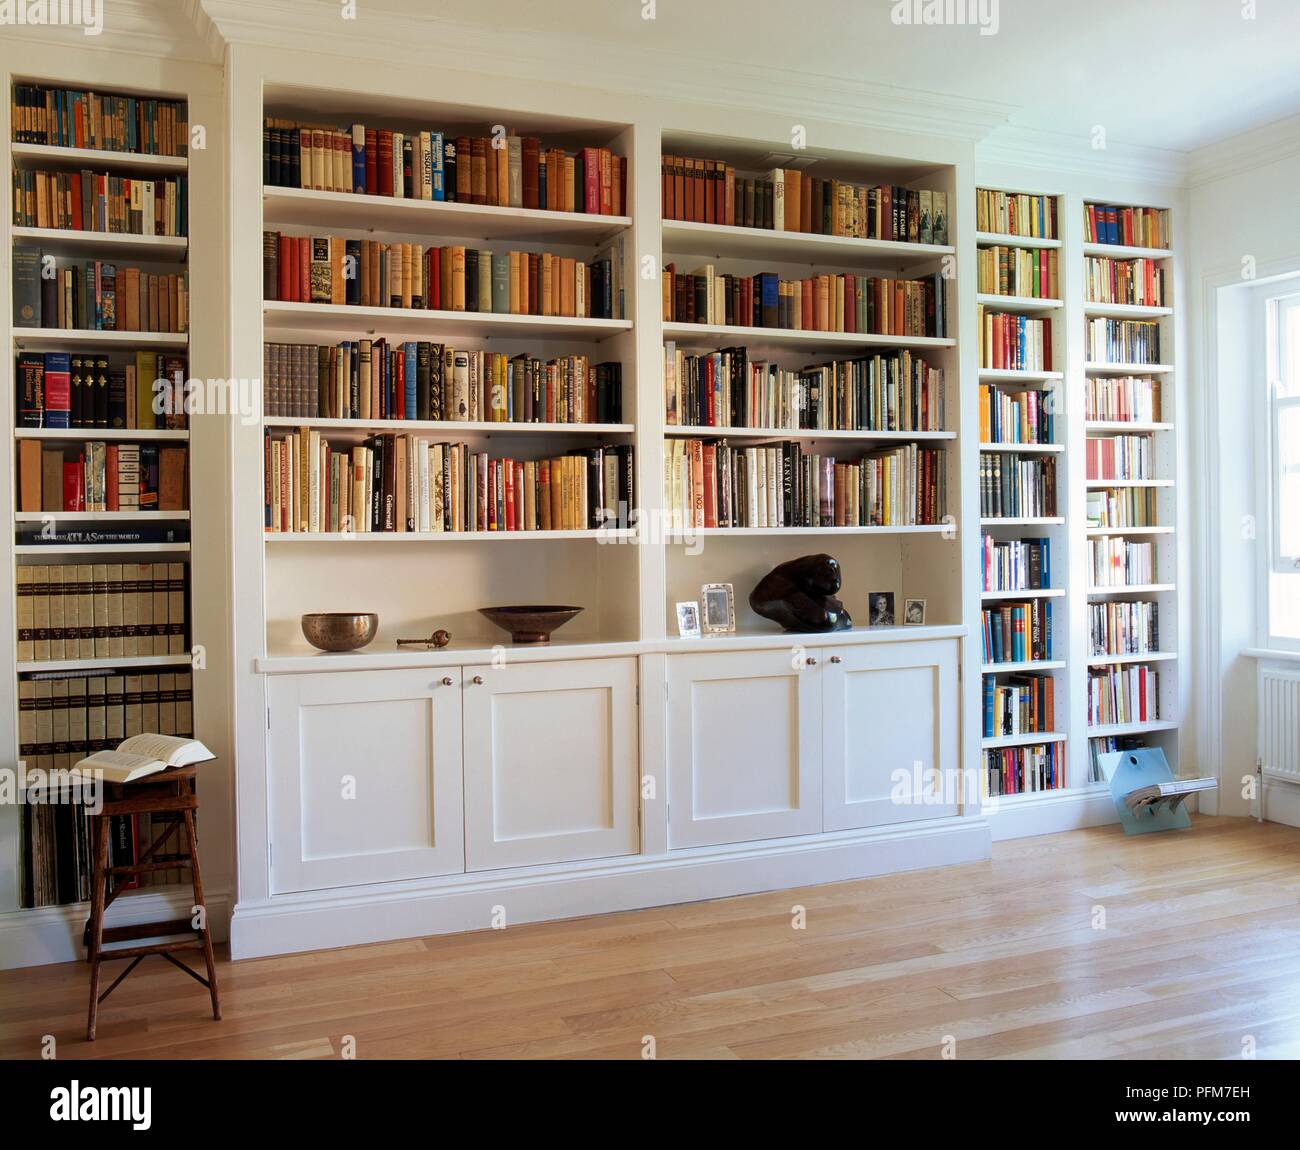 White, built-in bookcase filled with books Stock Photo - Alamy